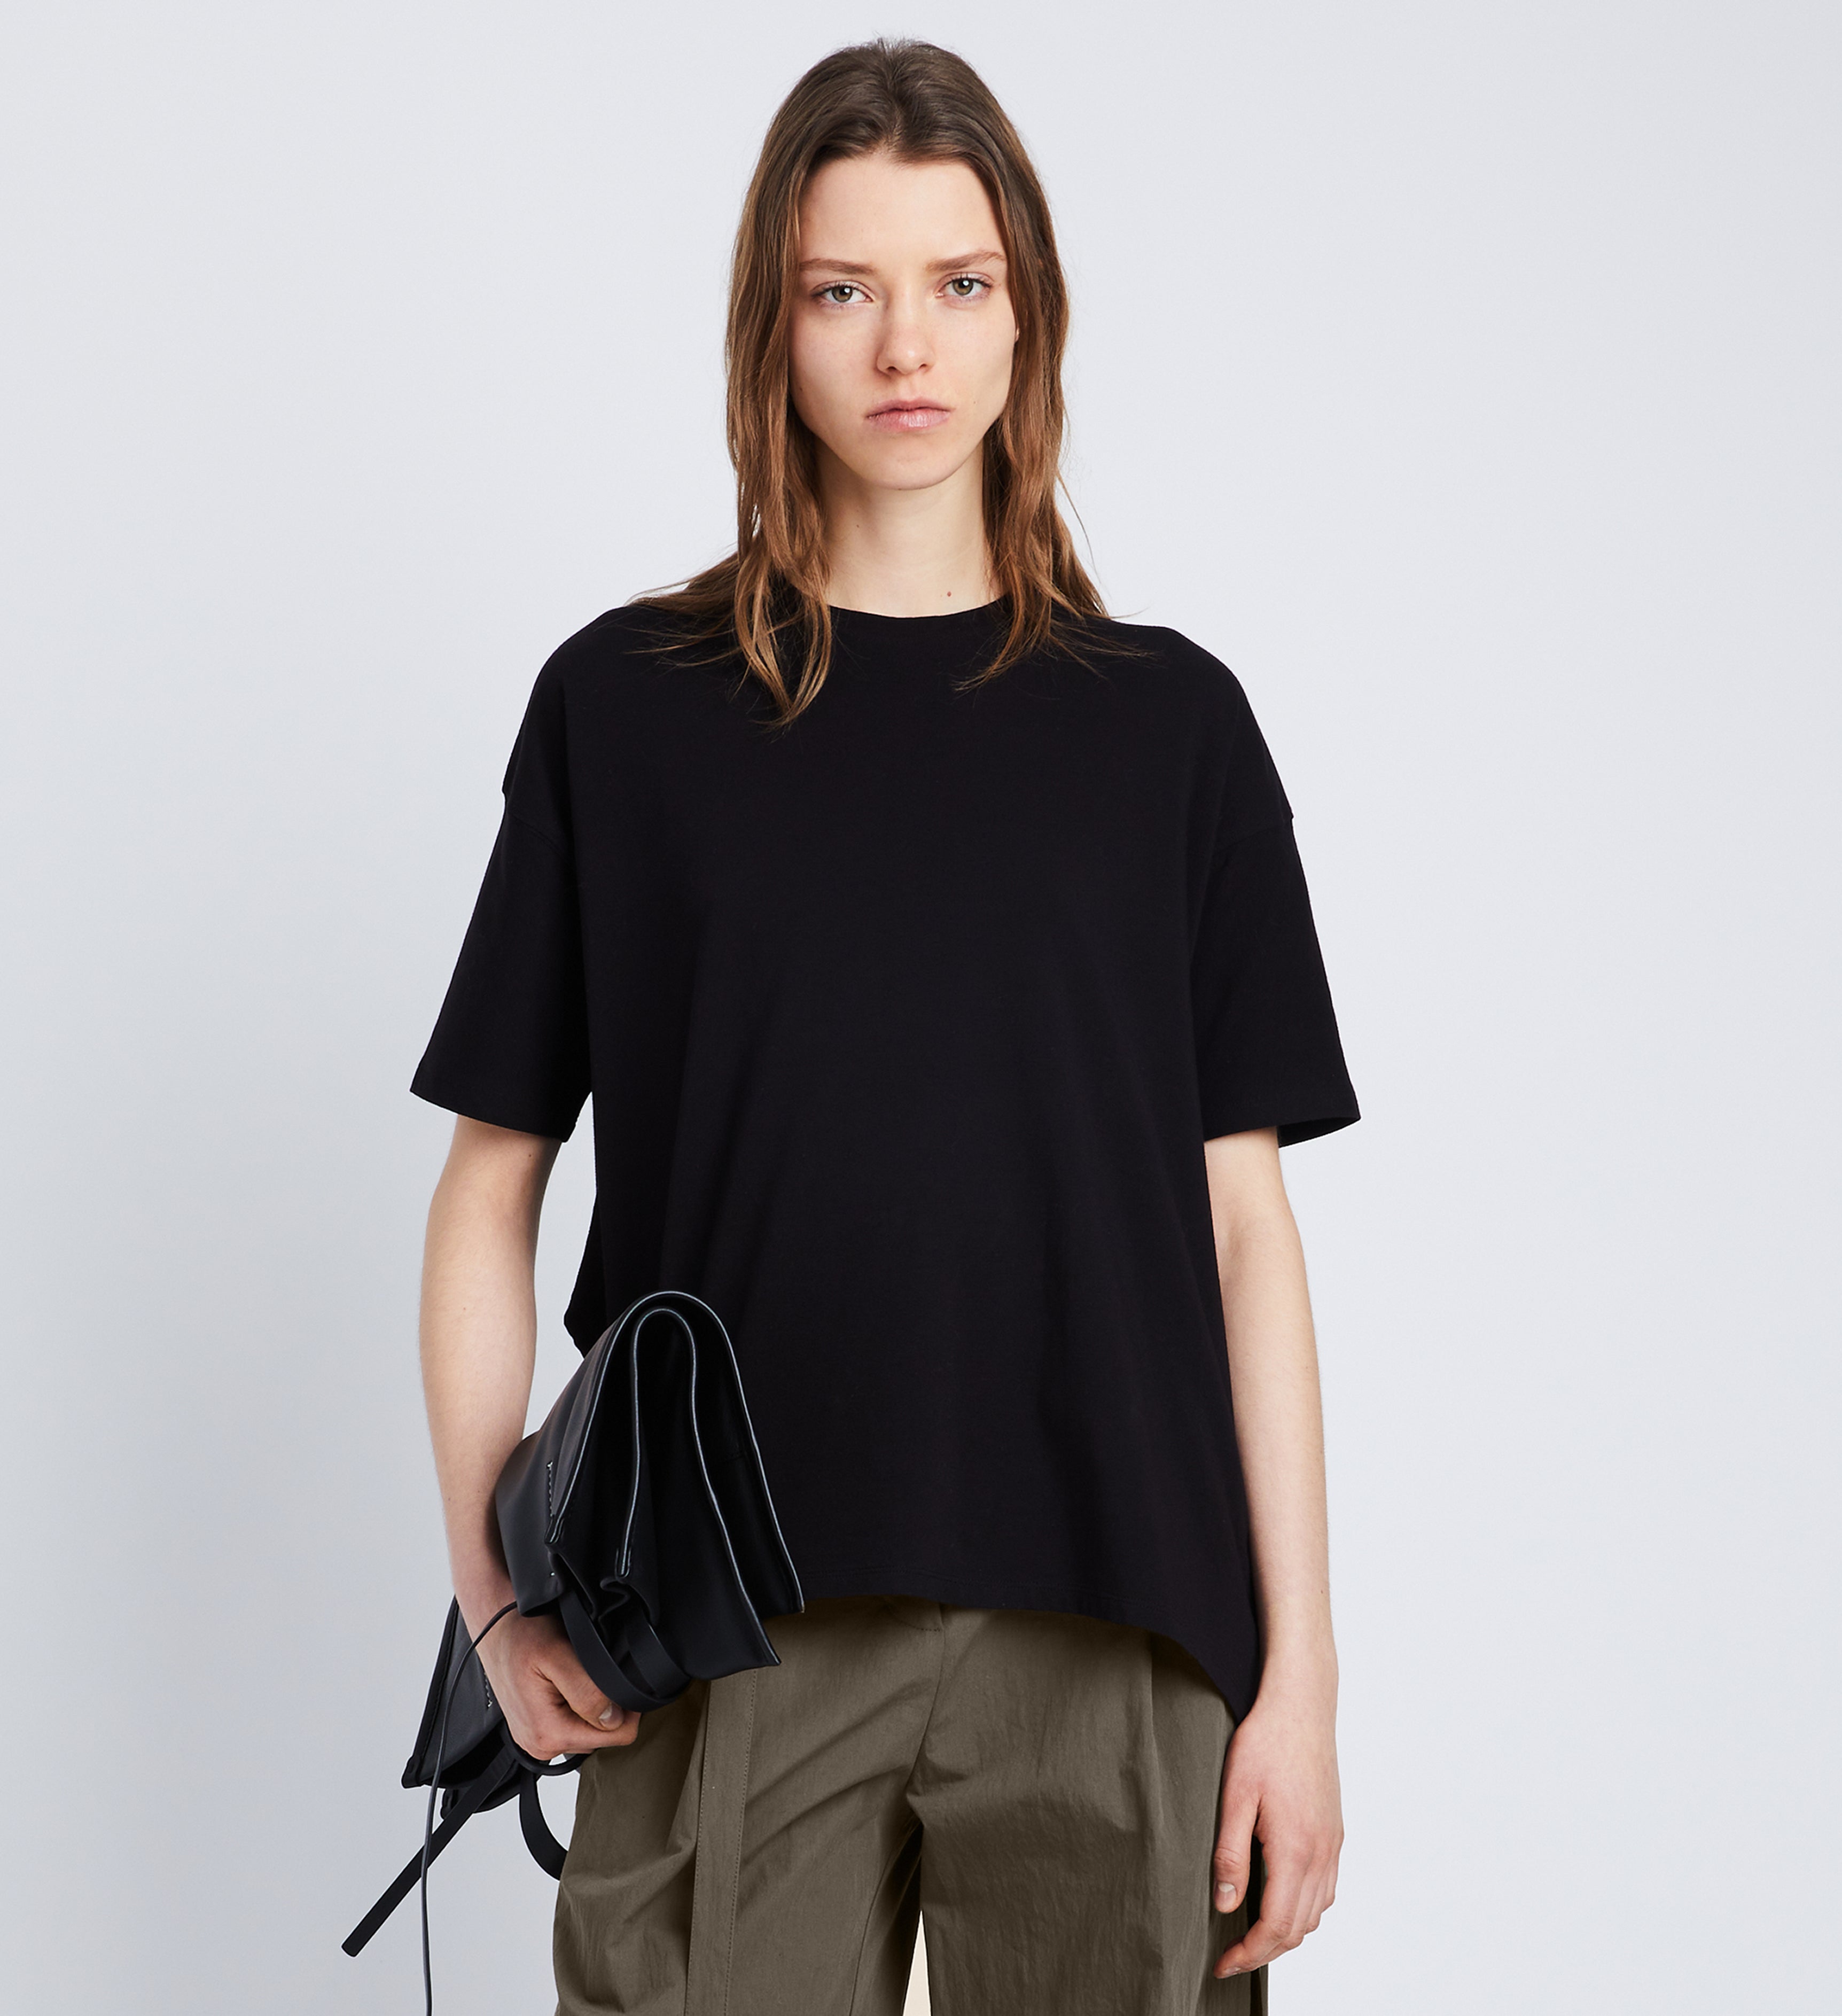 White Label T-Shirts | Proenza Schouler - Official Site